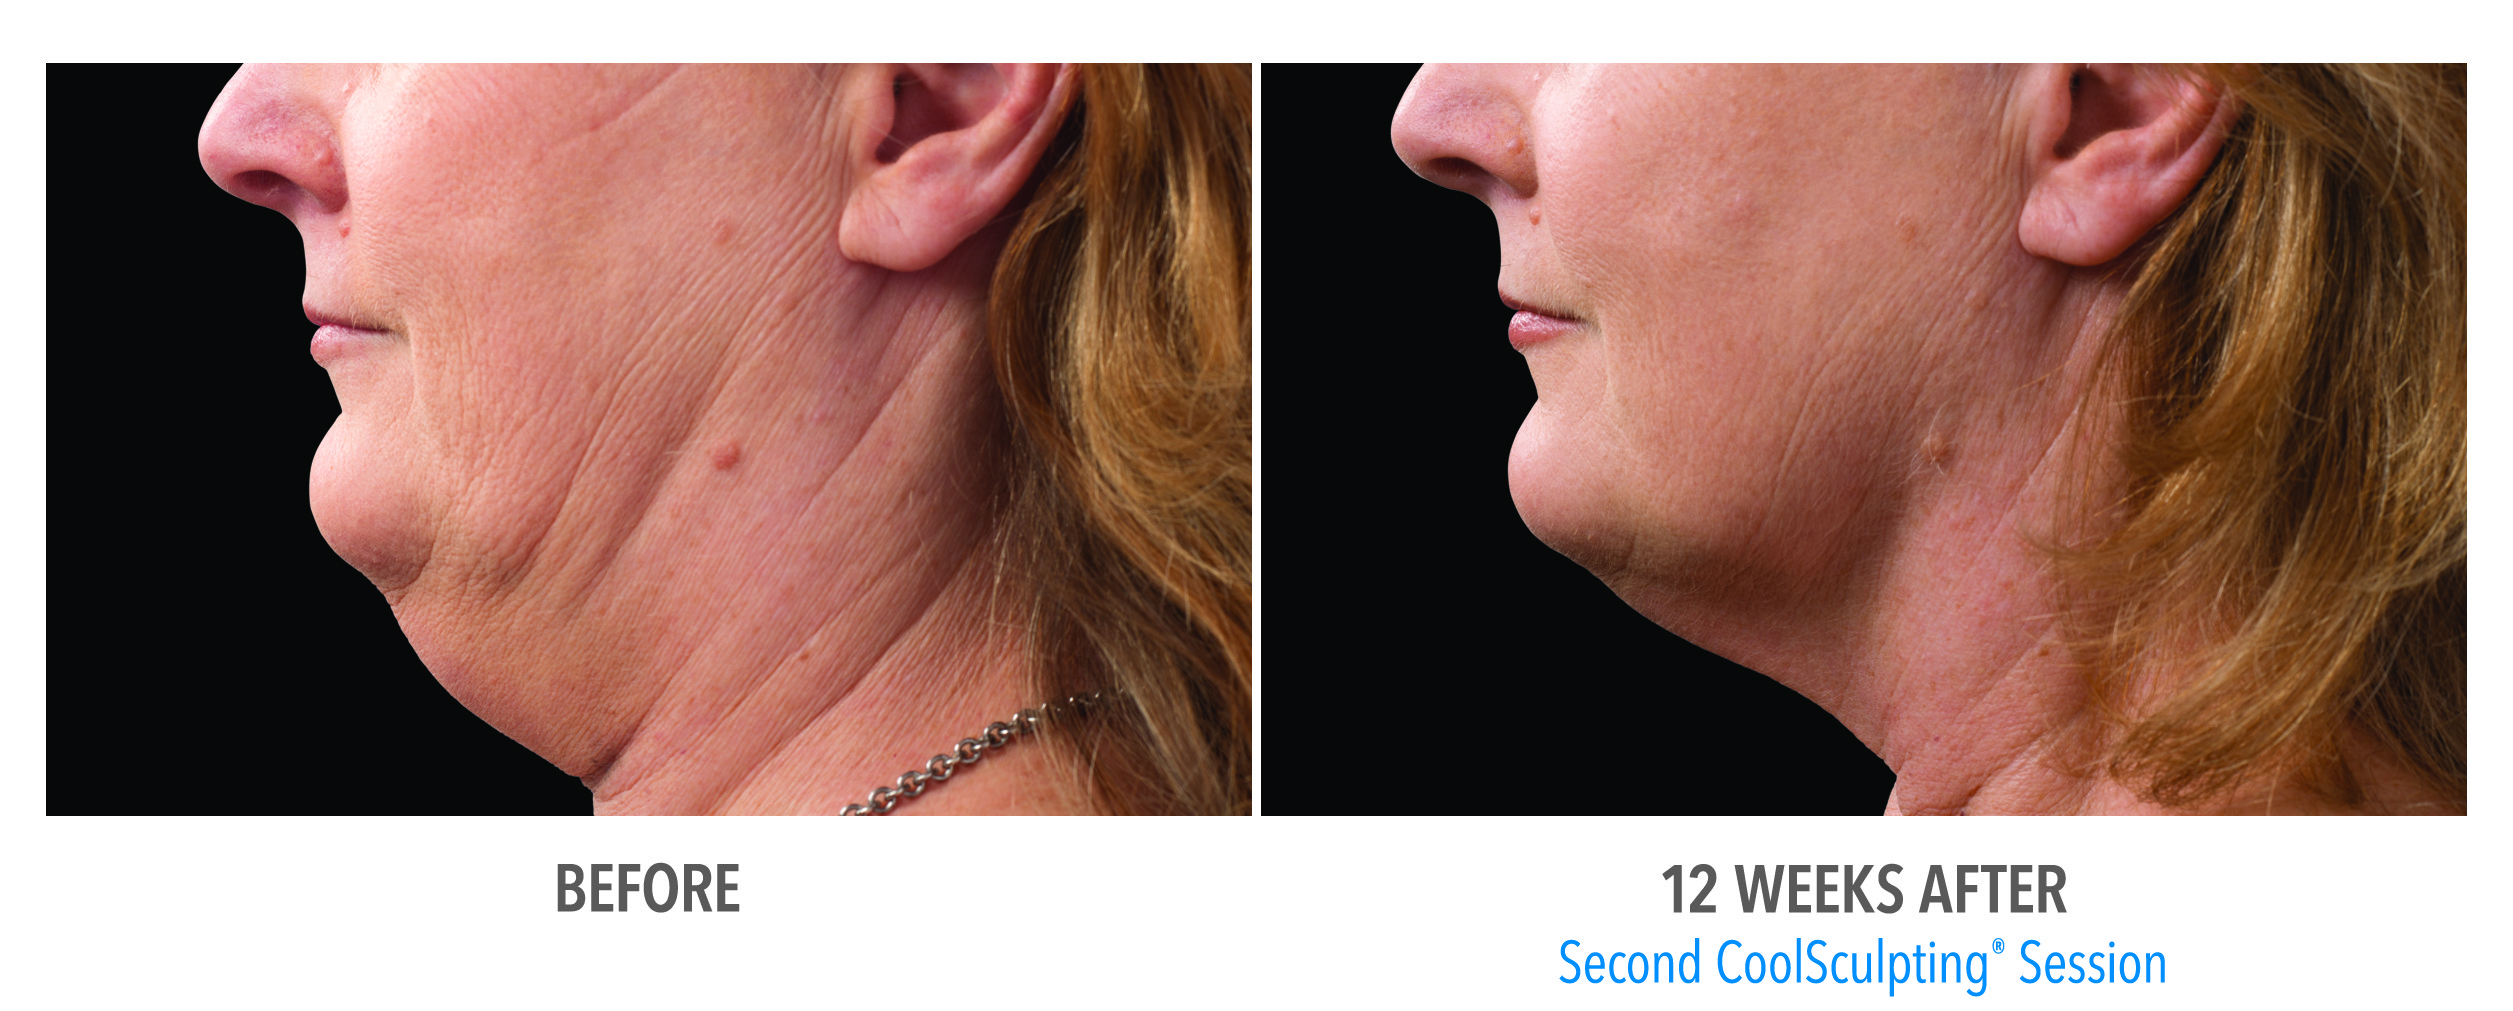 Hinsdale CoolSculpting double chin